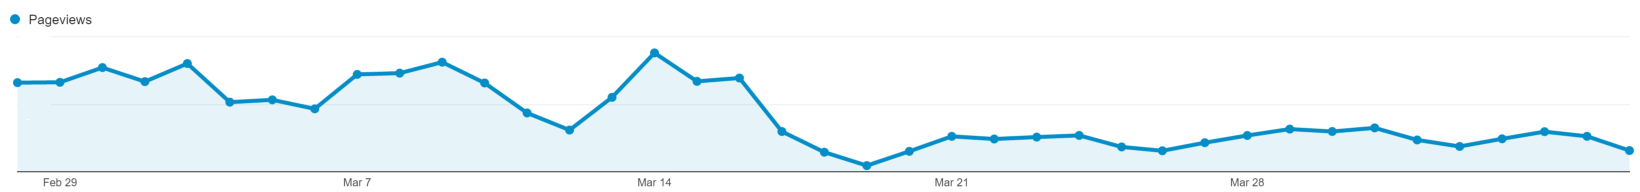 Total Page Views in Google Analytics